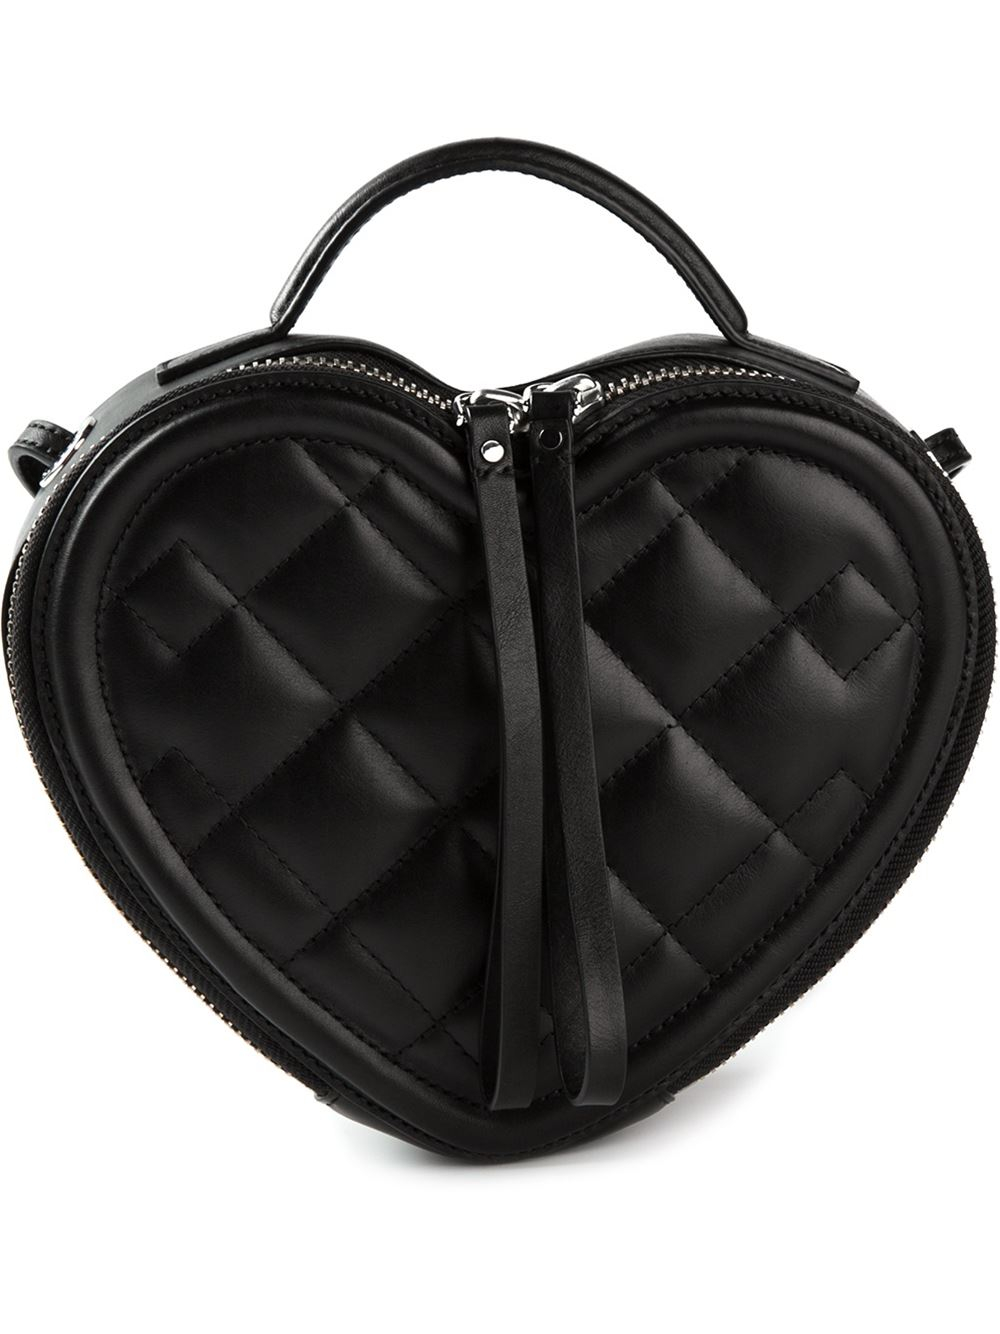 Marc By Marc Jacobs 'Heart To Heart' Shoulder Bag in Black | Lyst